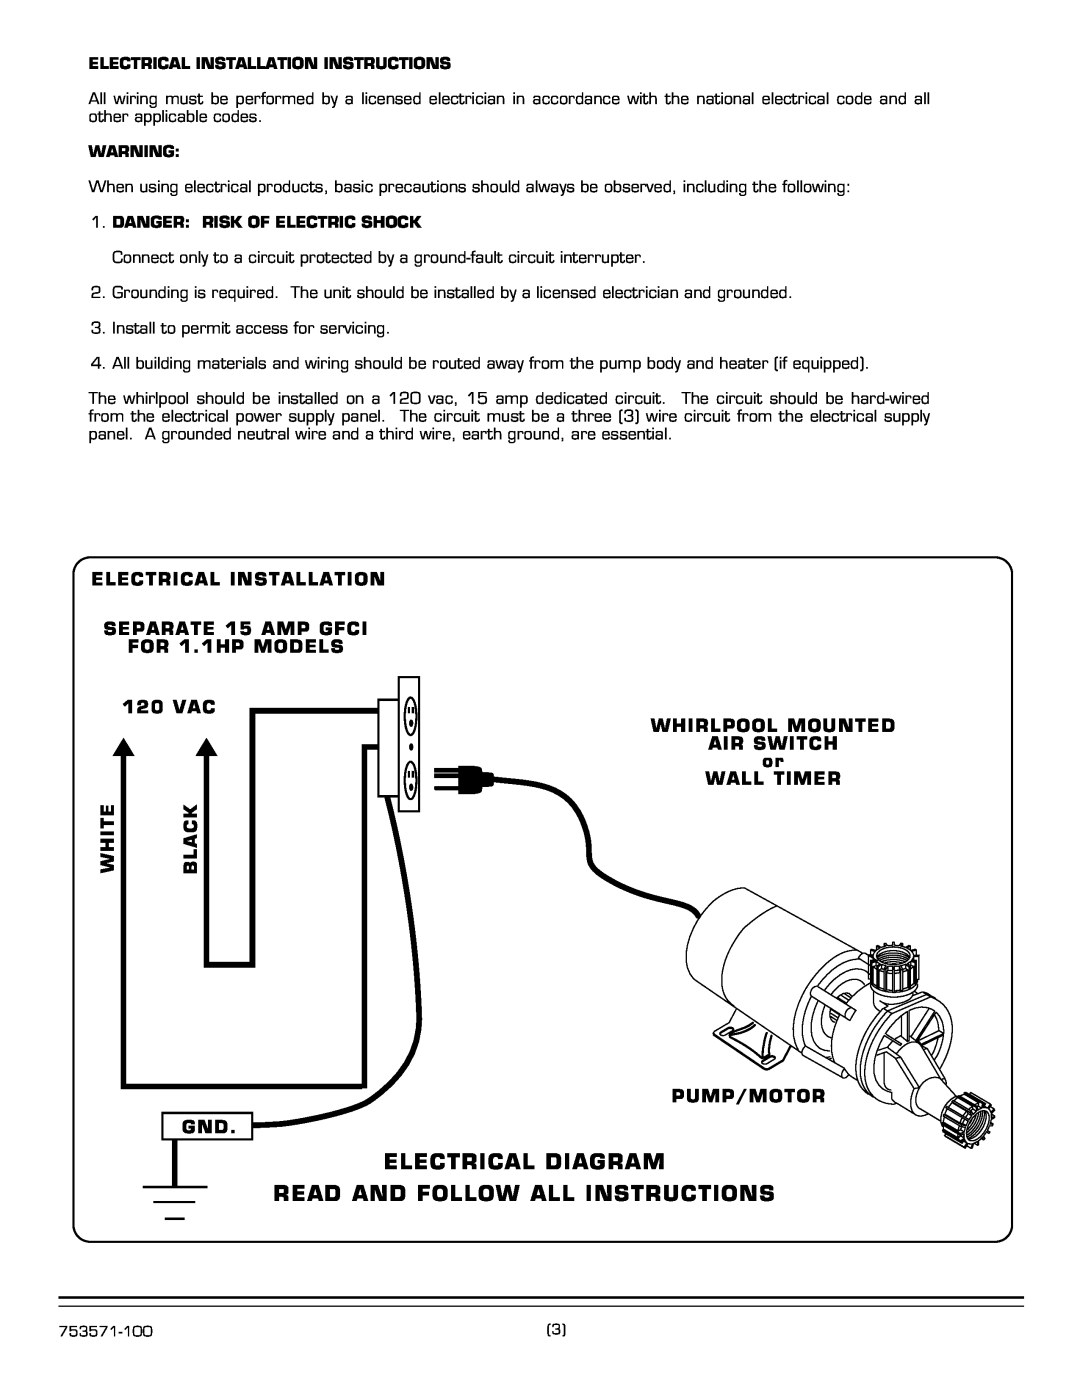 American Standard 1742 Series installation instructions Electrical Diagram, Read And Follow All Instructions 